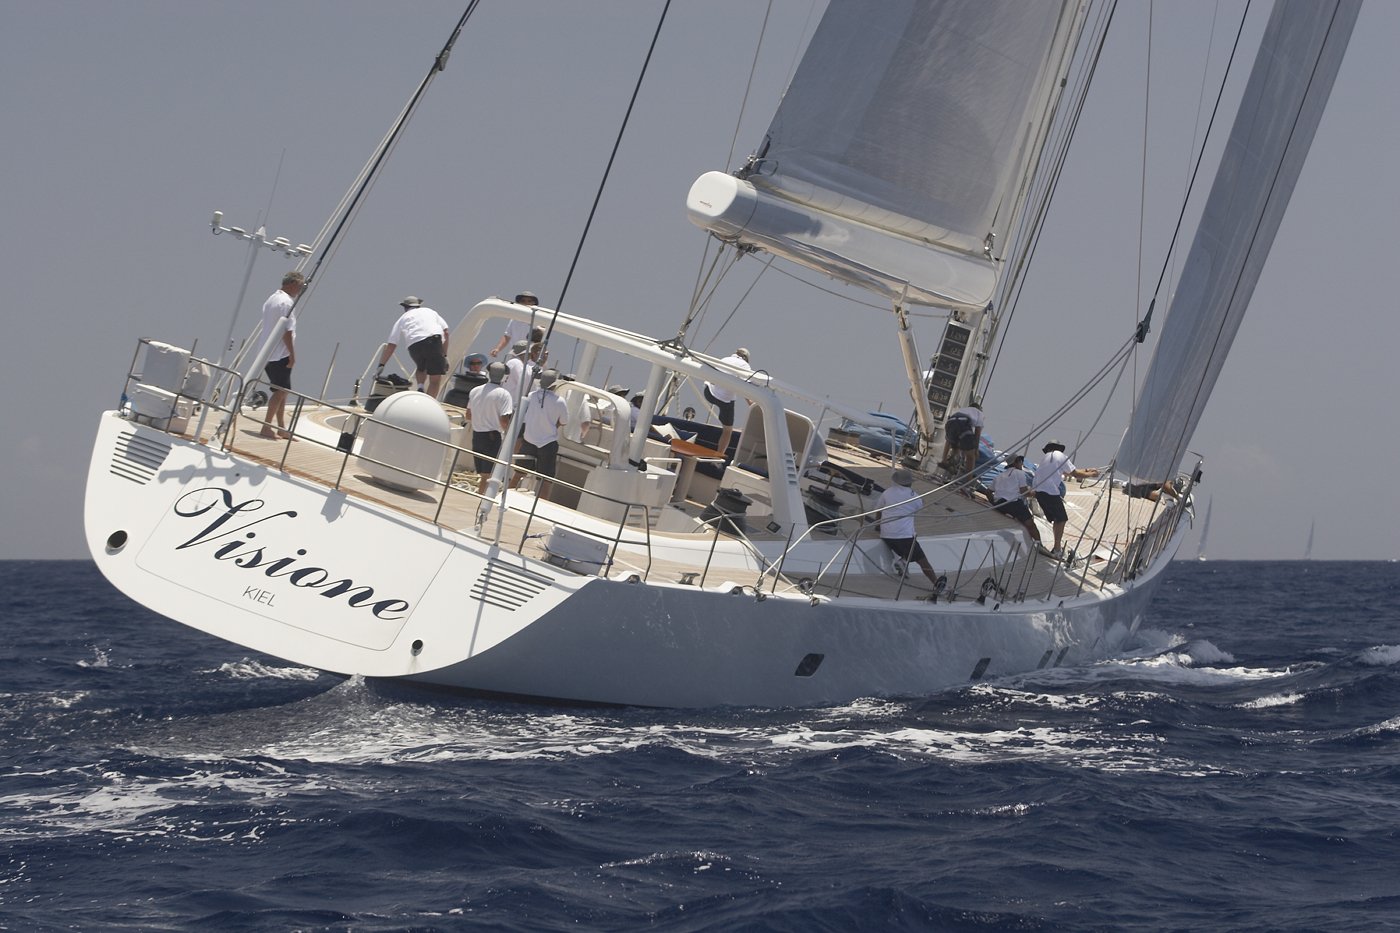 Sailing Yacht VISIONE • Baltic Yachts • 2002 • Owner Hasso Plattner